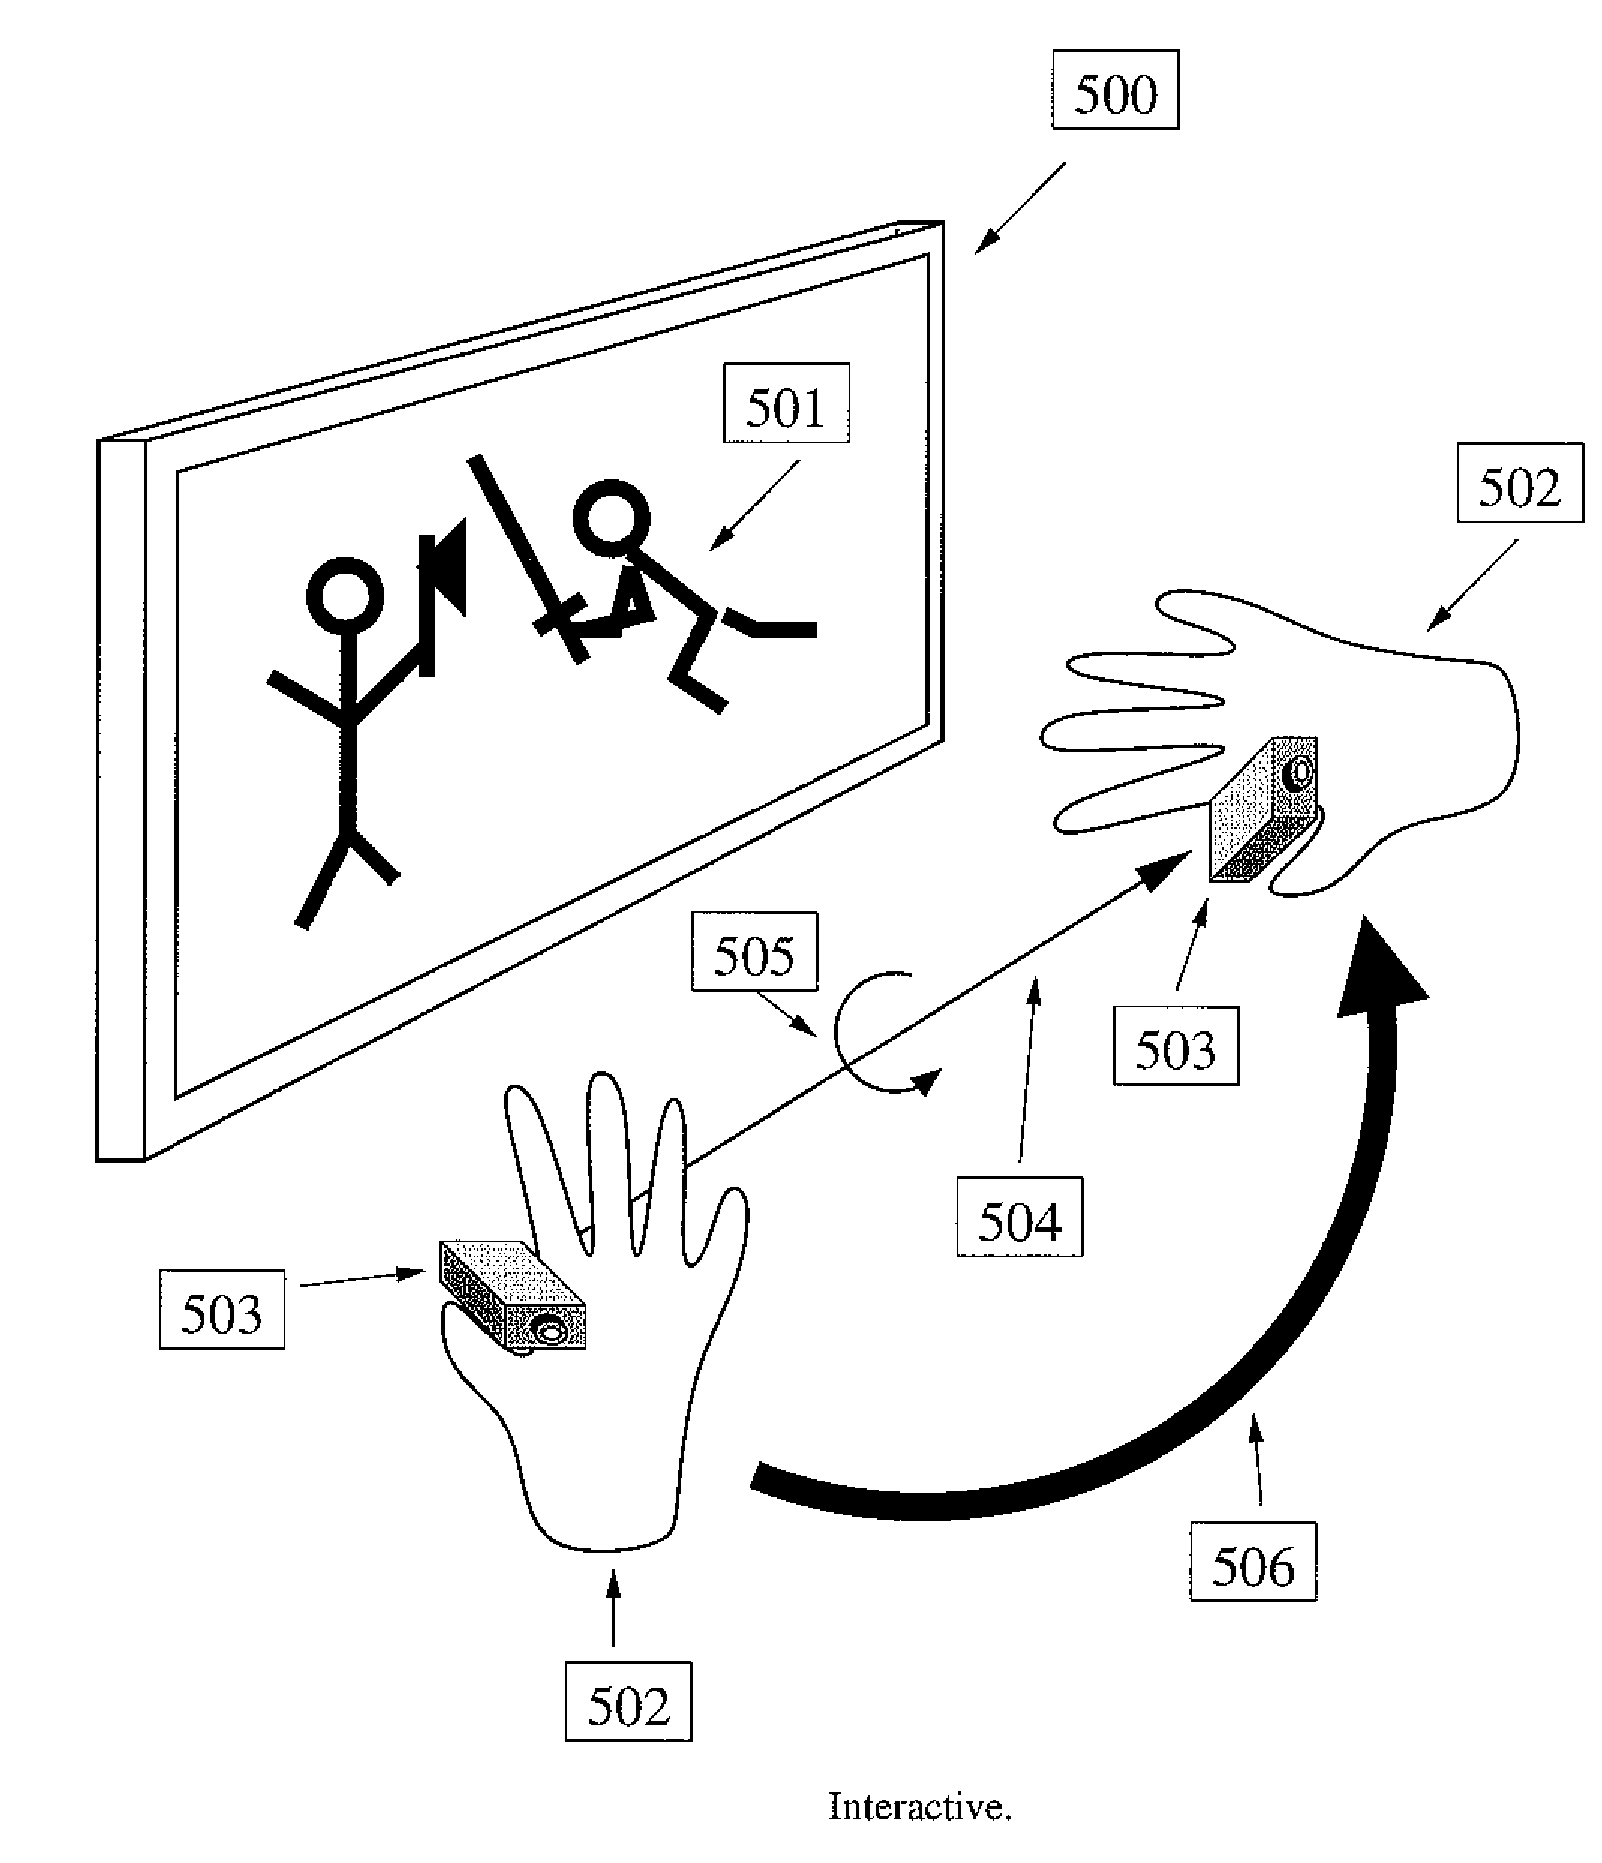 Self-Contained Inertial Navigation System for Interactive Control Using Movable Controllers